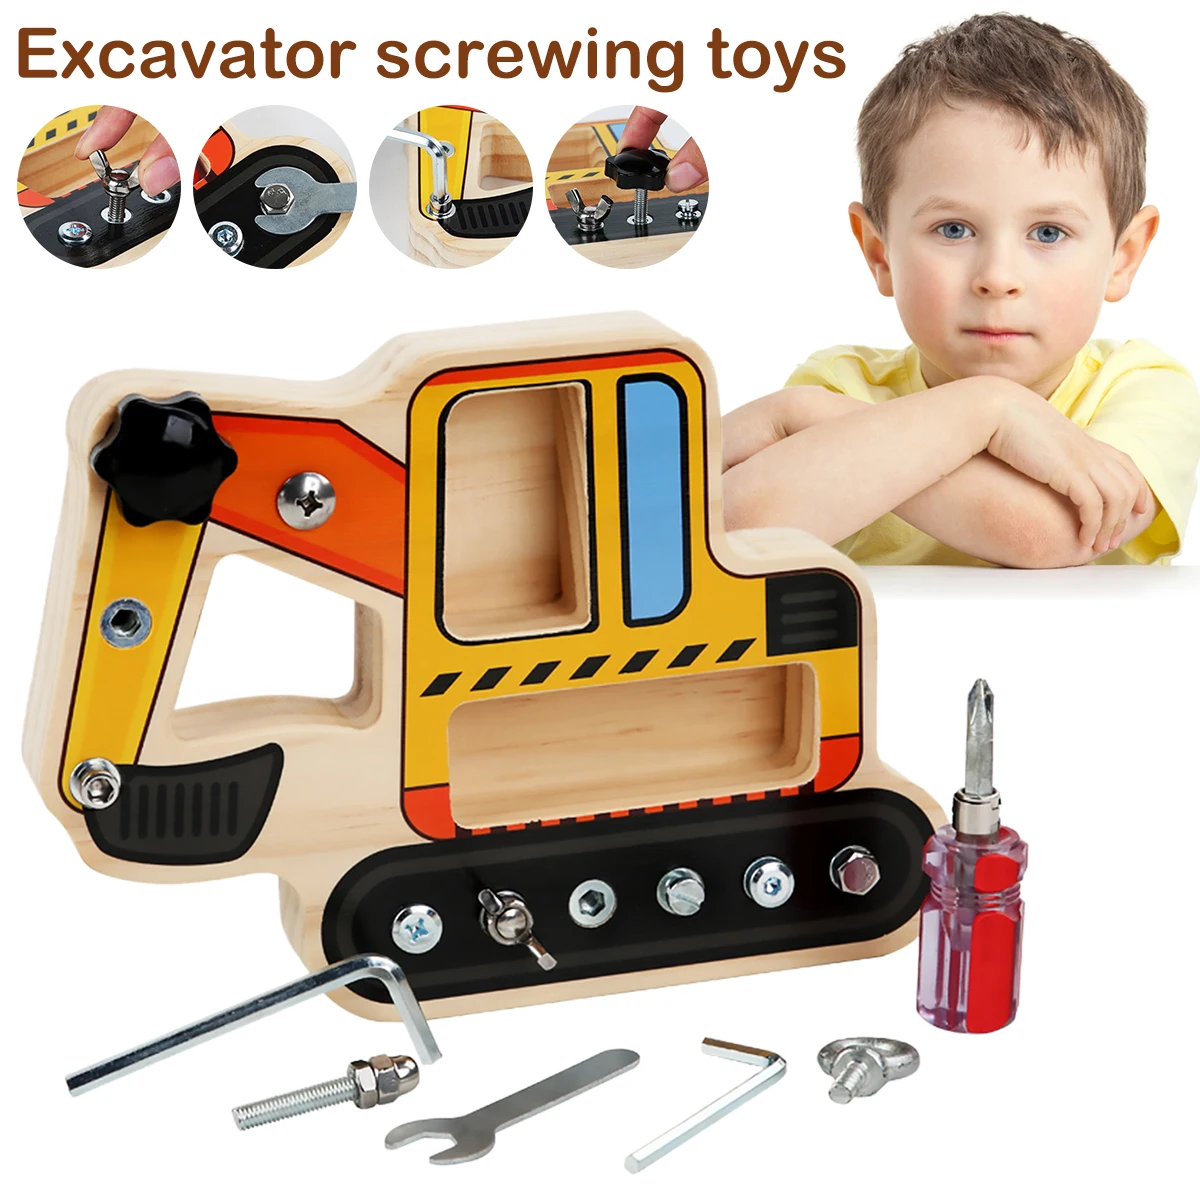 

Montessori Toy Fun Excavator Busy Screwdriver Set Learning Basic Skills Tool Educational Sensory Toy for Toddlers Kids